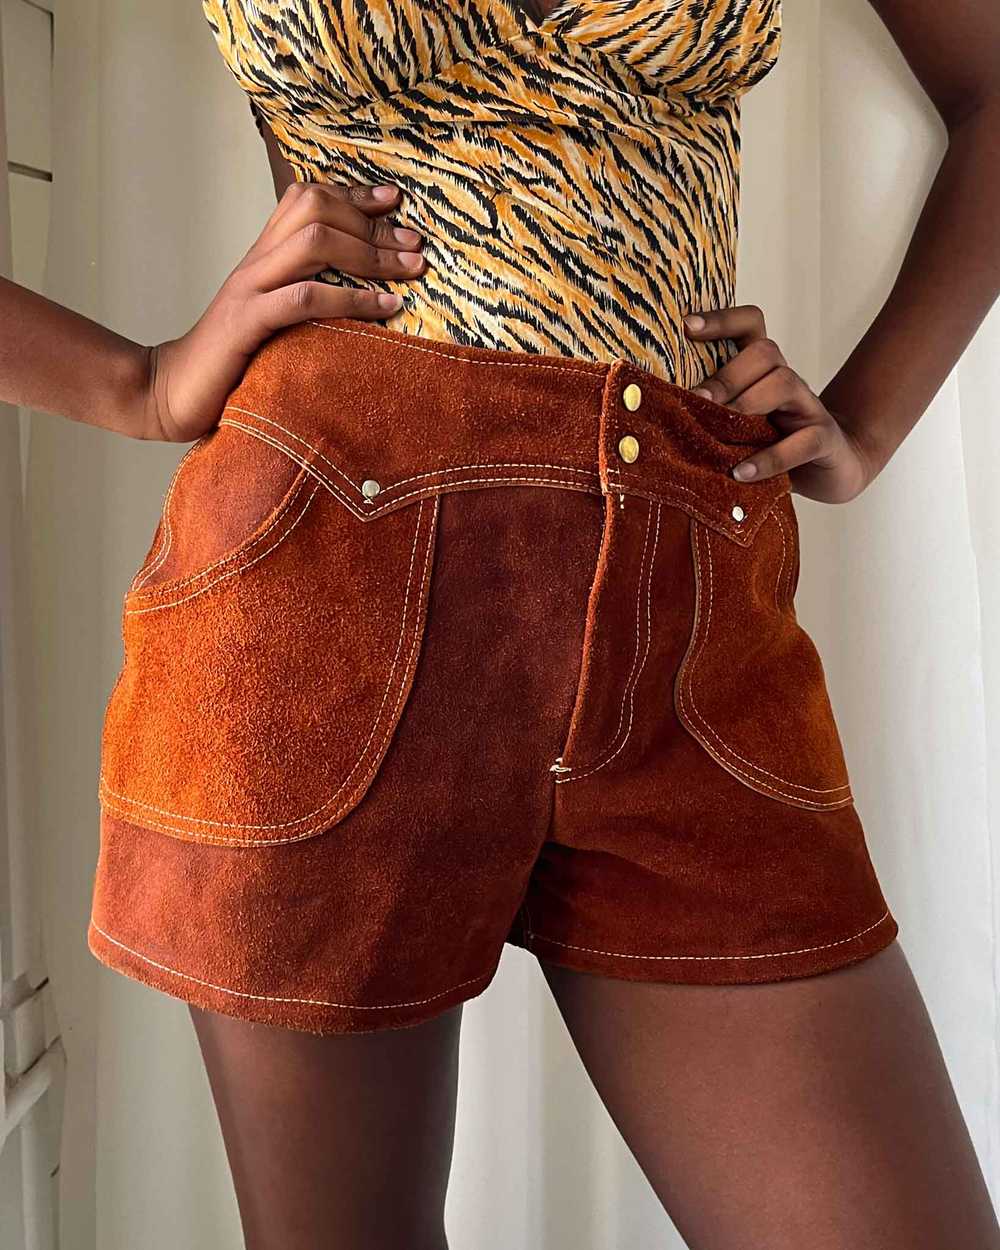 60s Suede Hot Shorts - image 1